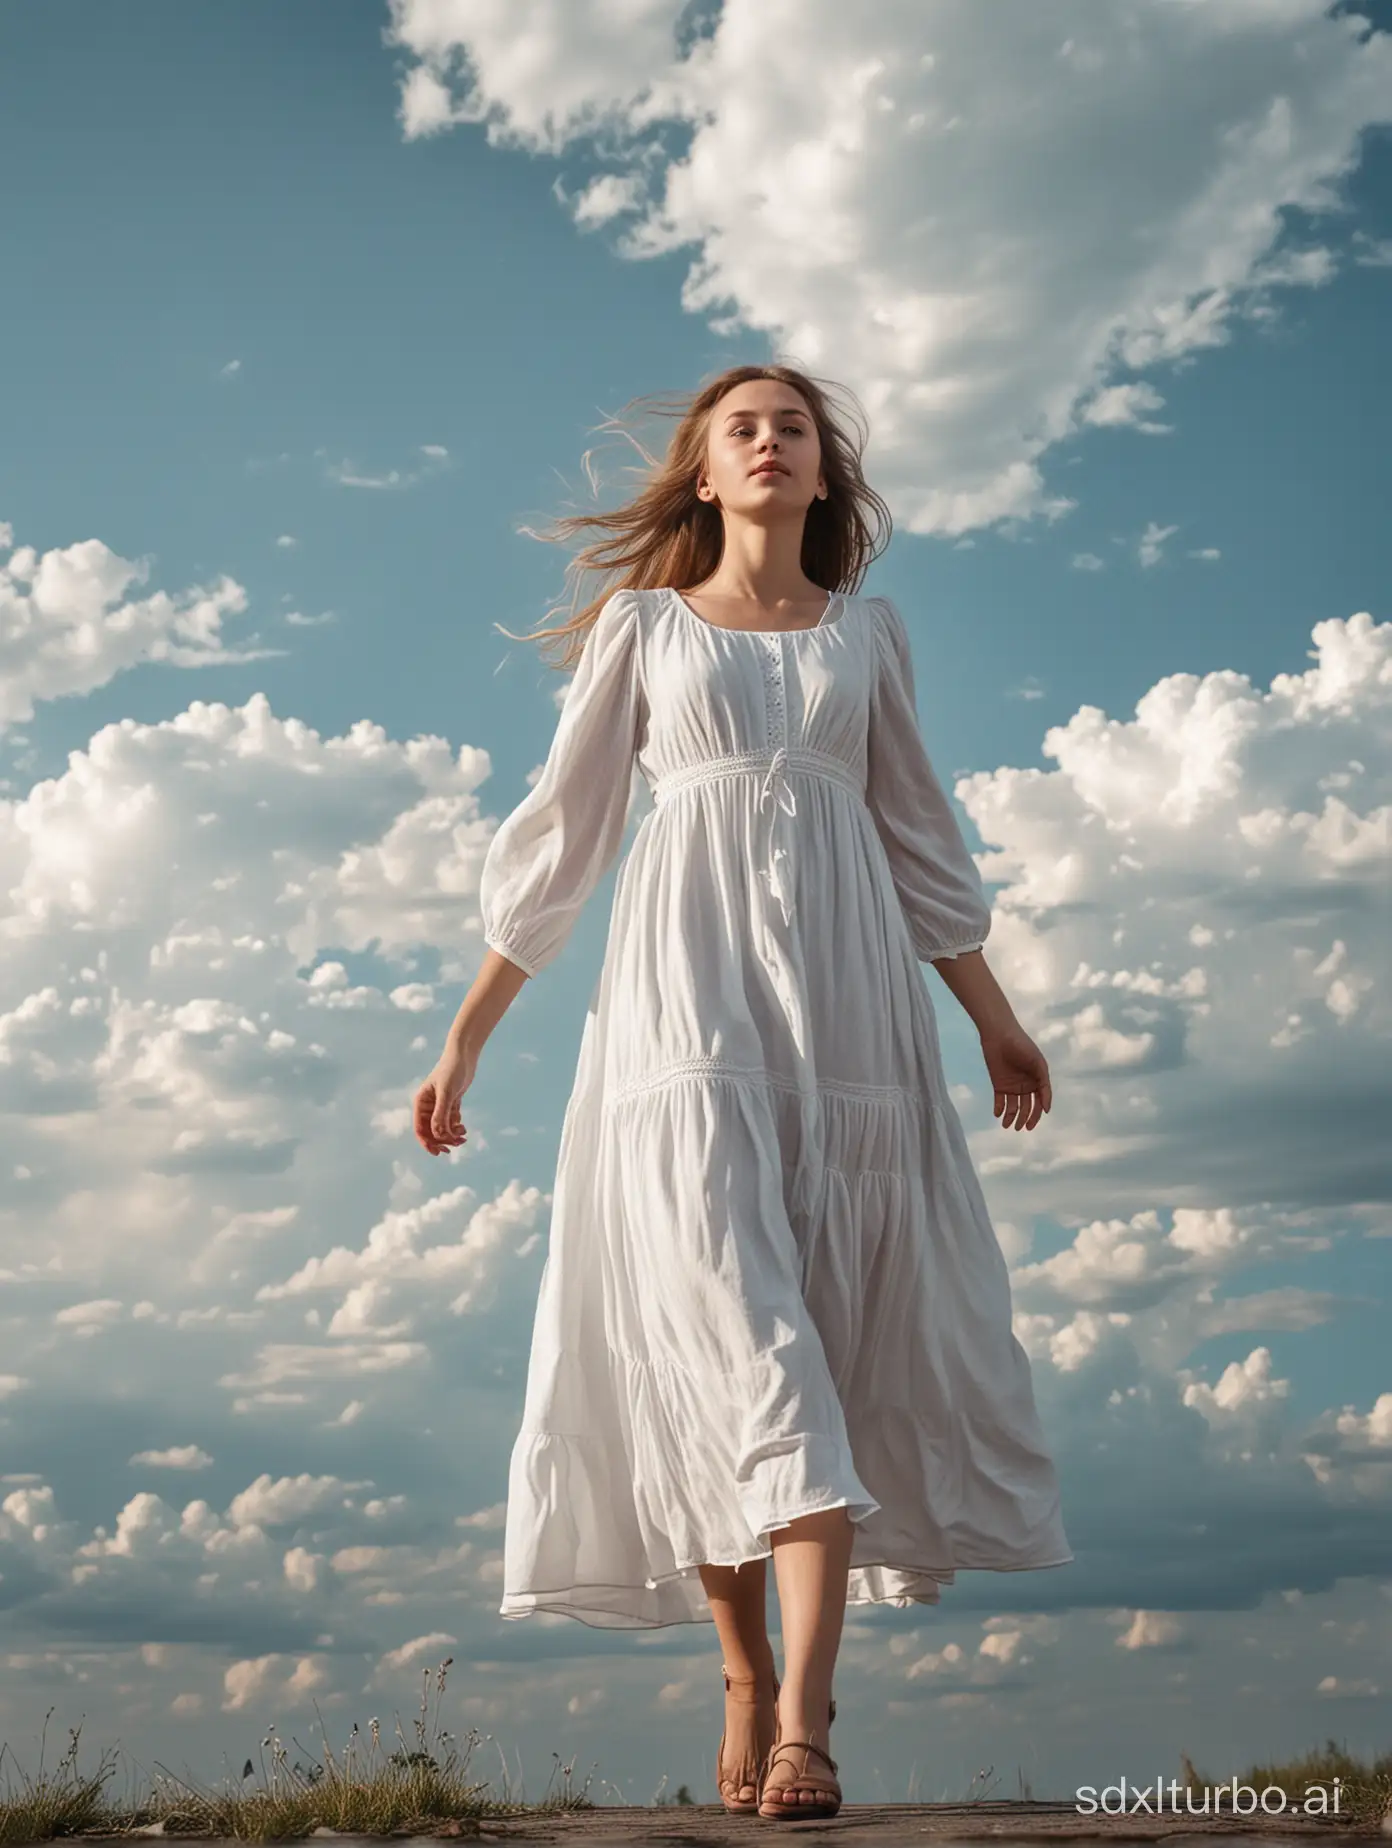 A Russian girl dressed in a white dress wanders in the sky.